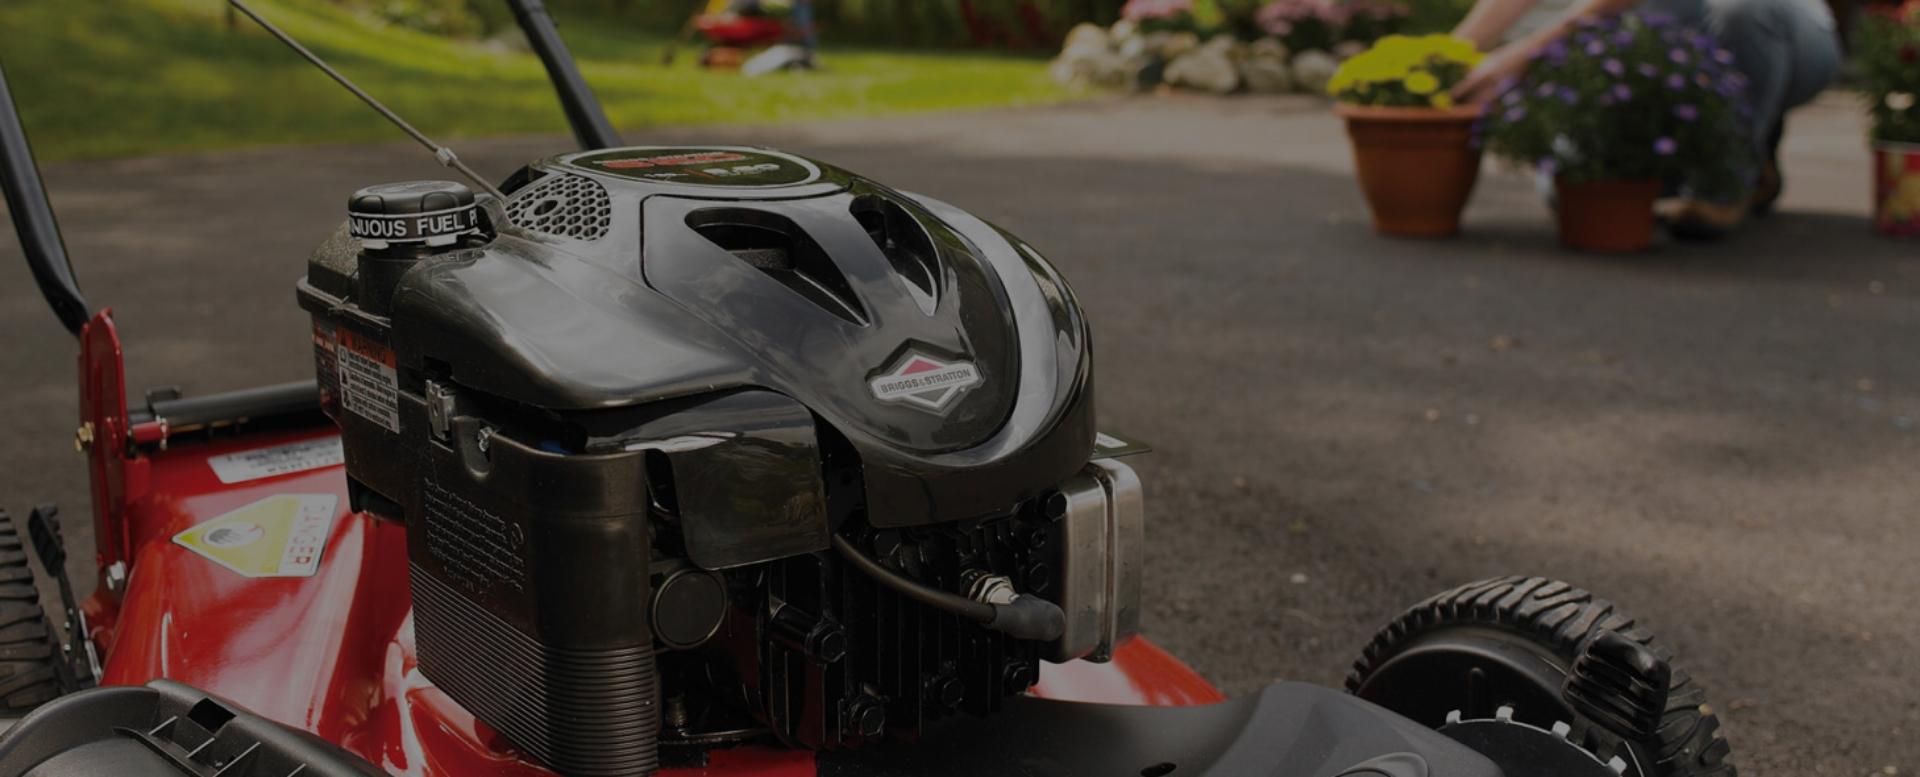 Briggs and Stratton products are available at Leslies Outdoor Power Equipment